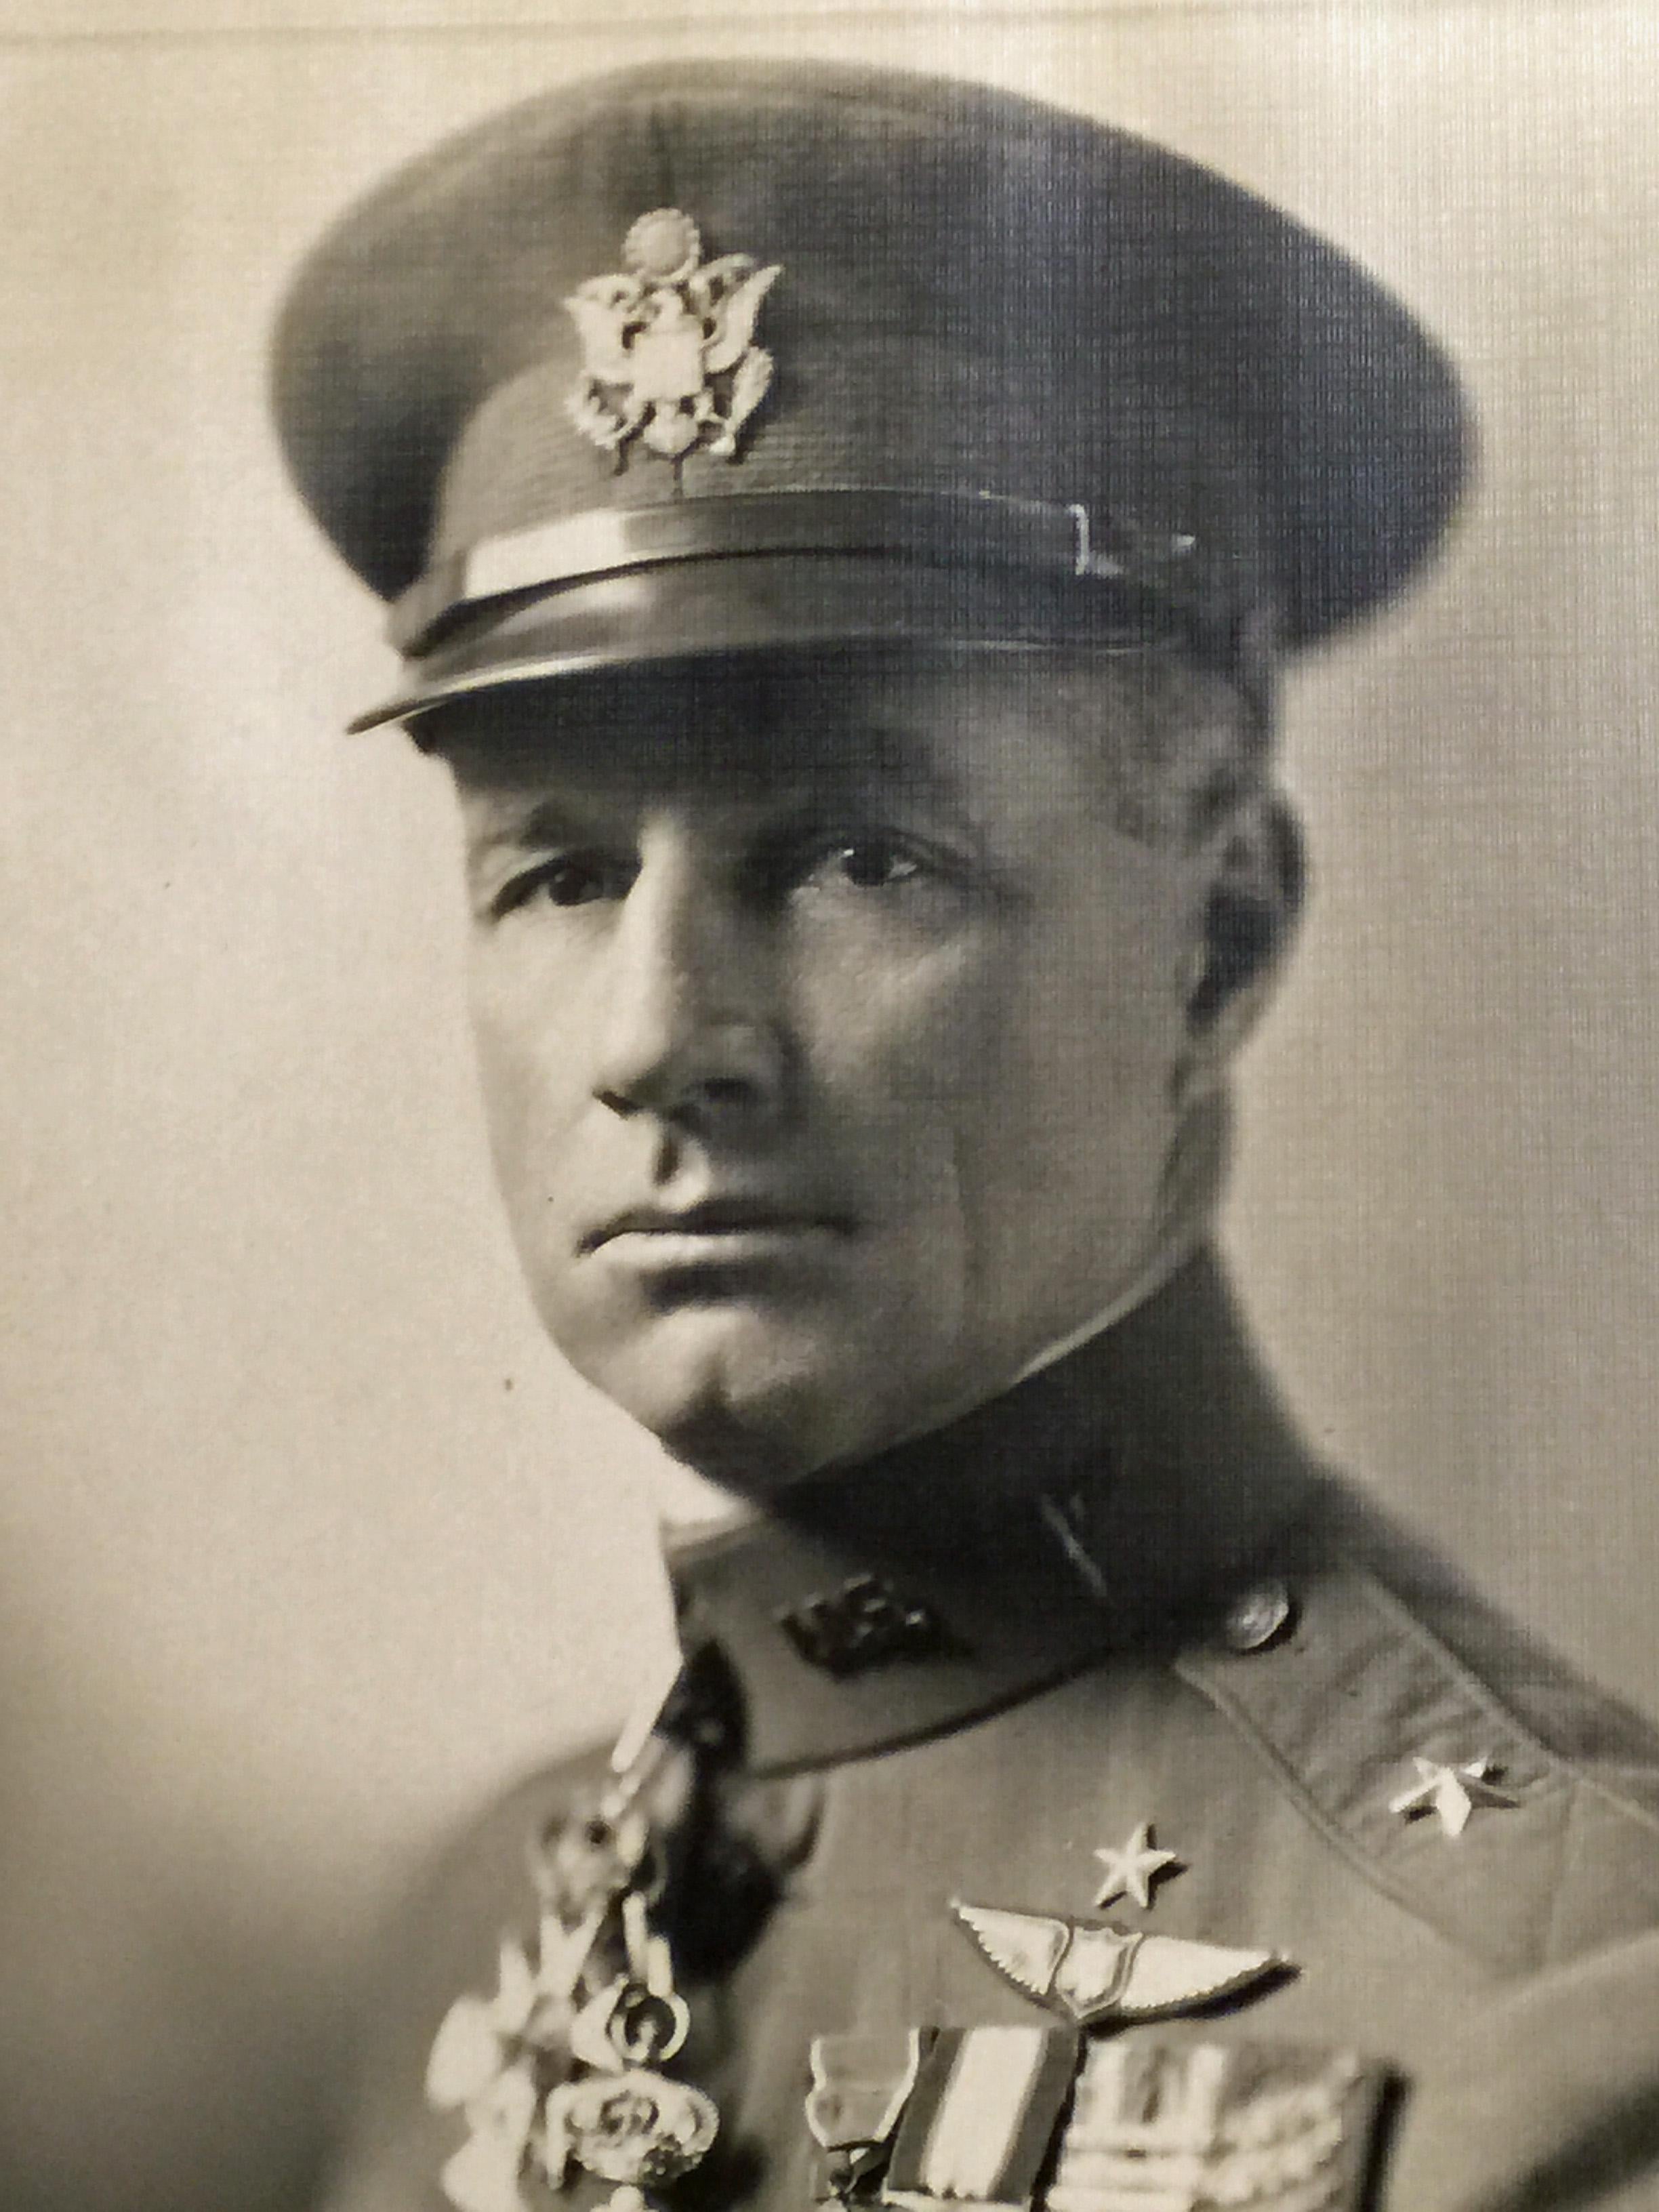 Unknown Portrait Photograph - GENERAL BILLY MITCHELL - SIGNED AND INSCRIBED PHOTO DATED JANUARY, 1926